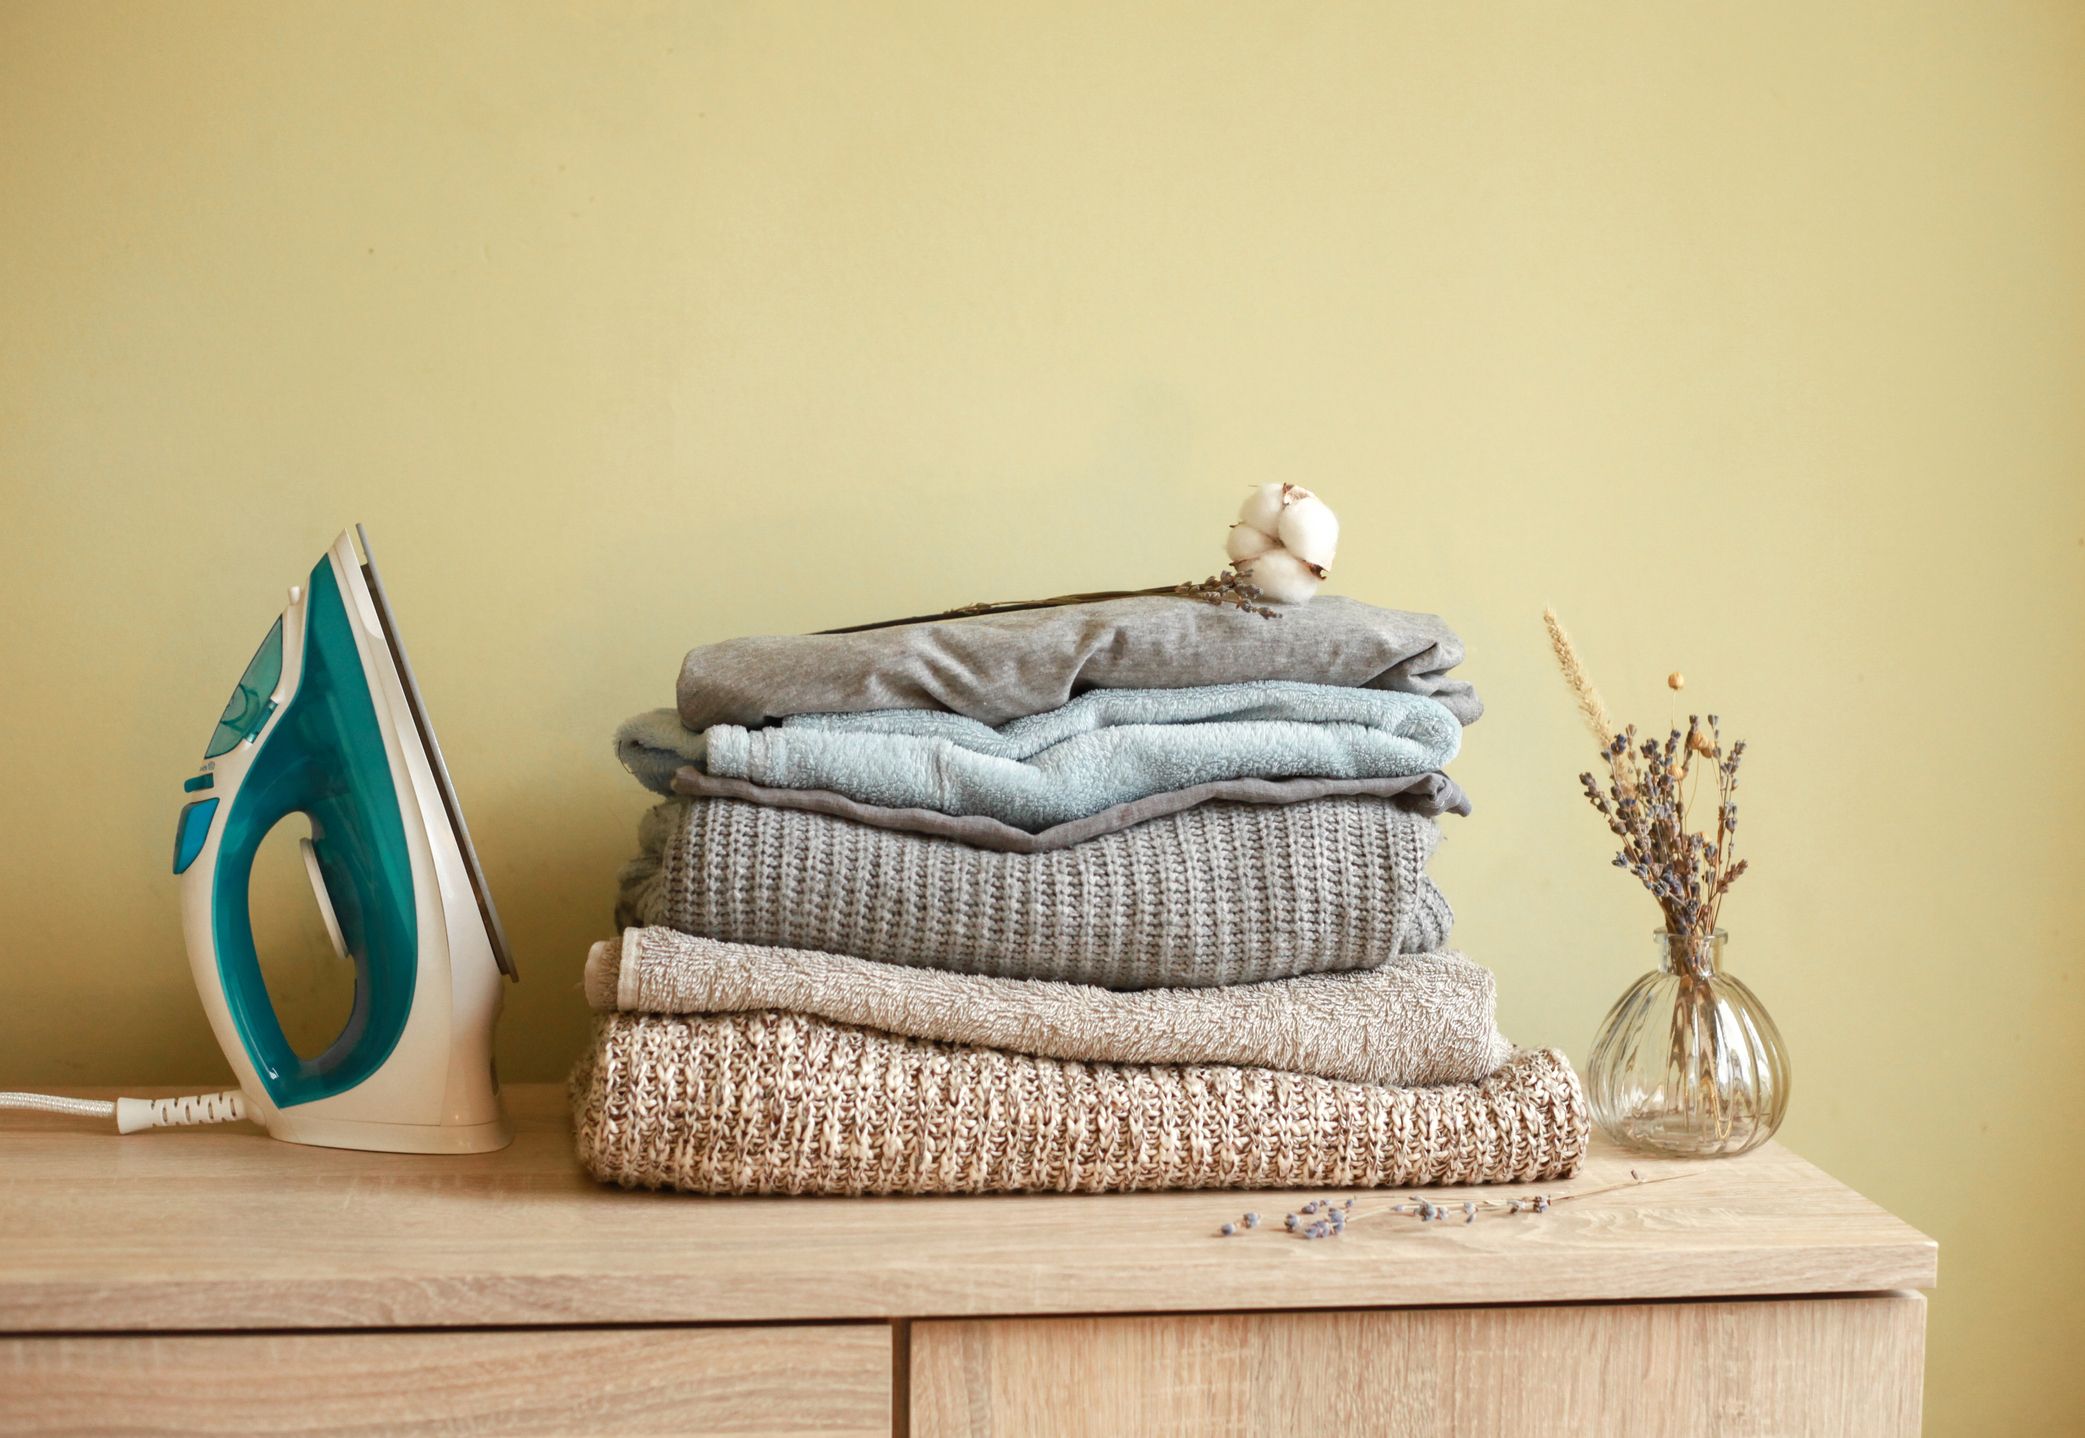 How to Air-Dry Clothes for Wrinkle-Free Results